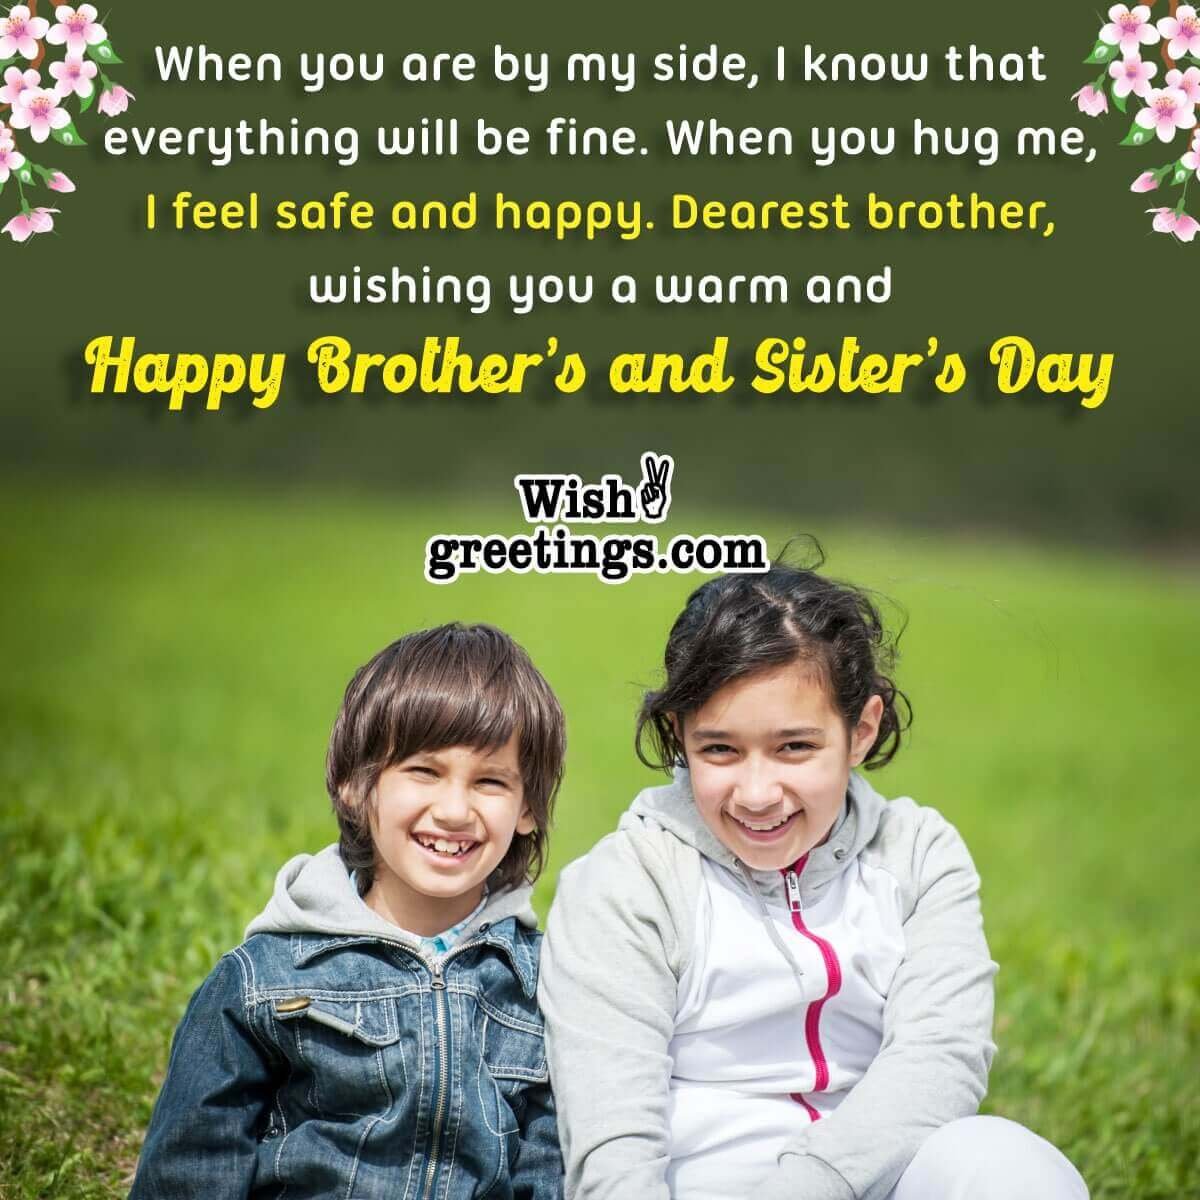 Brother’s And Sister’s Day Greeting Photo